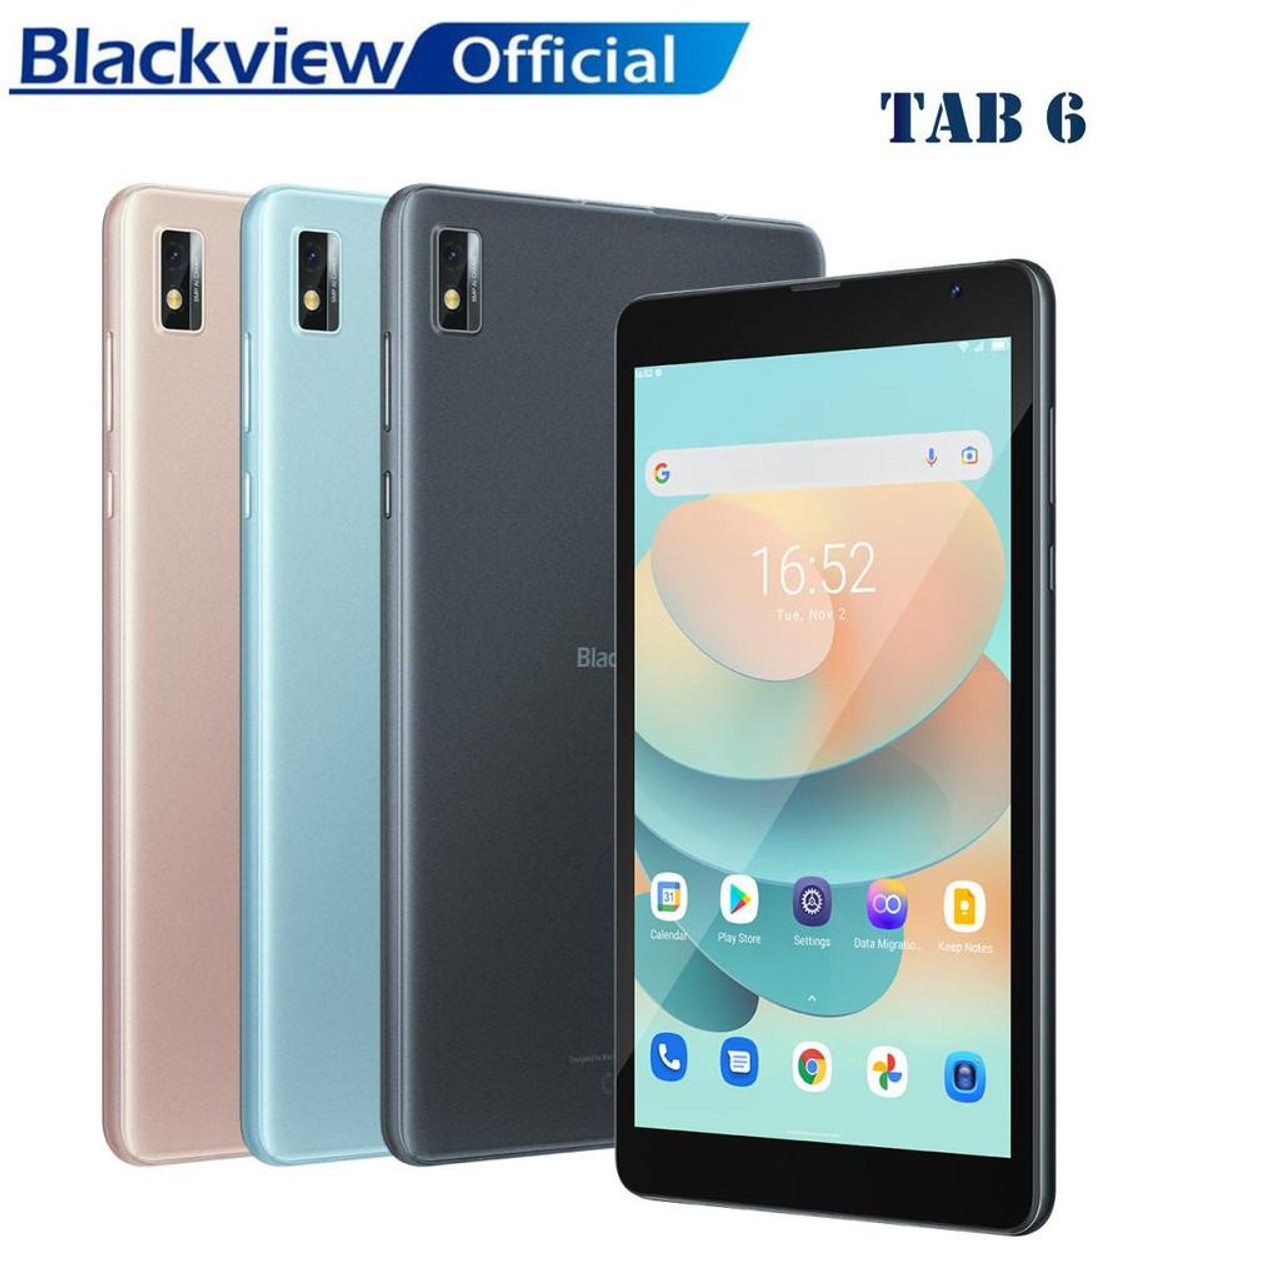 Blackview Tab 18: Official Unboxing